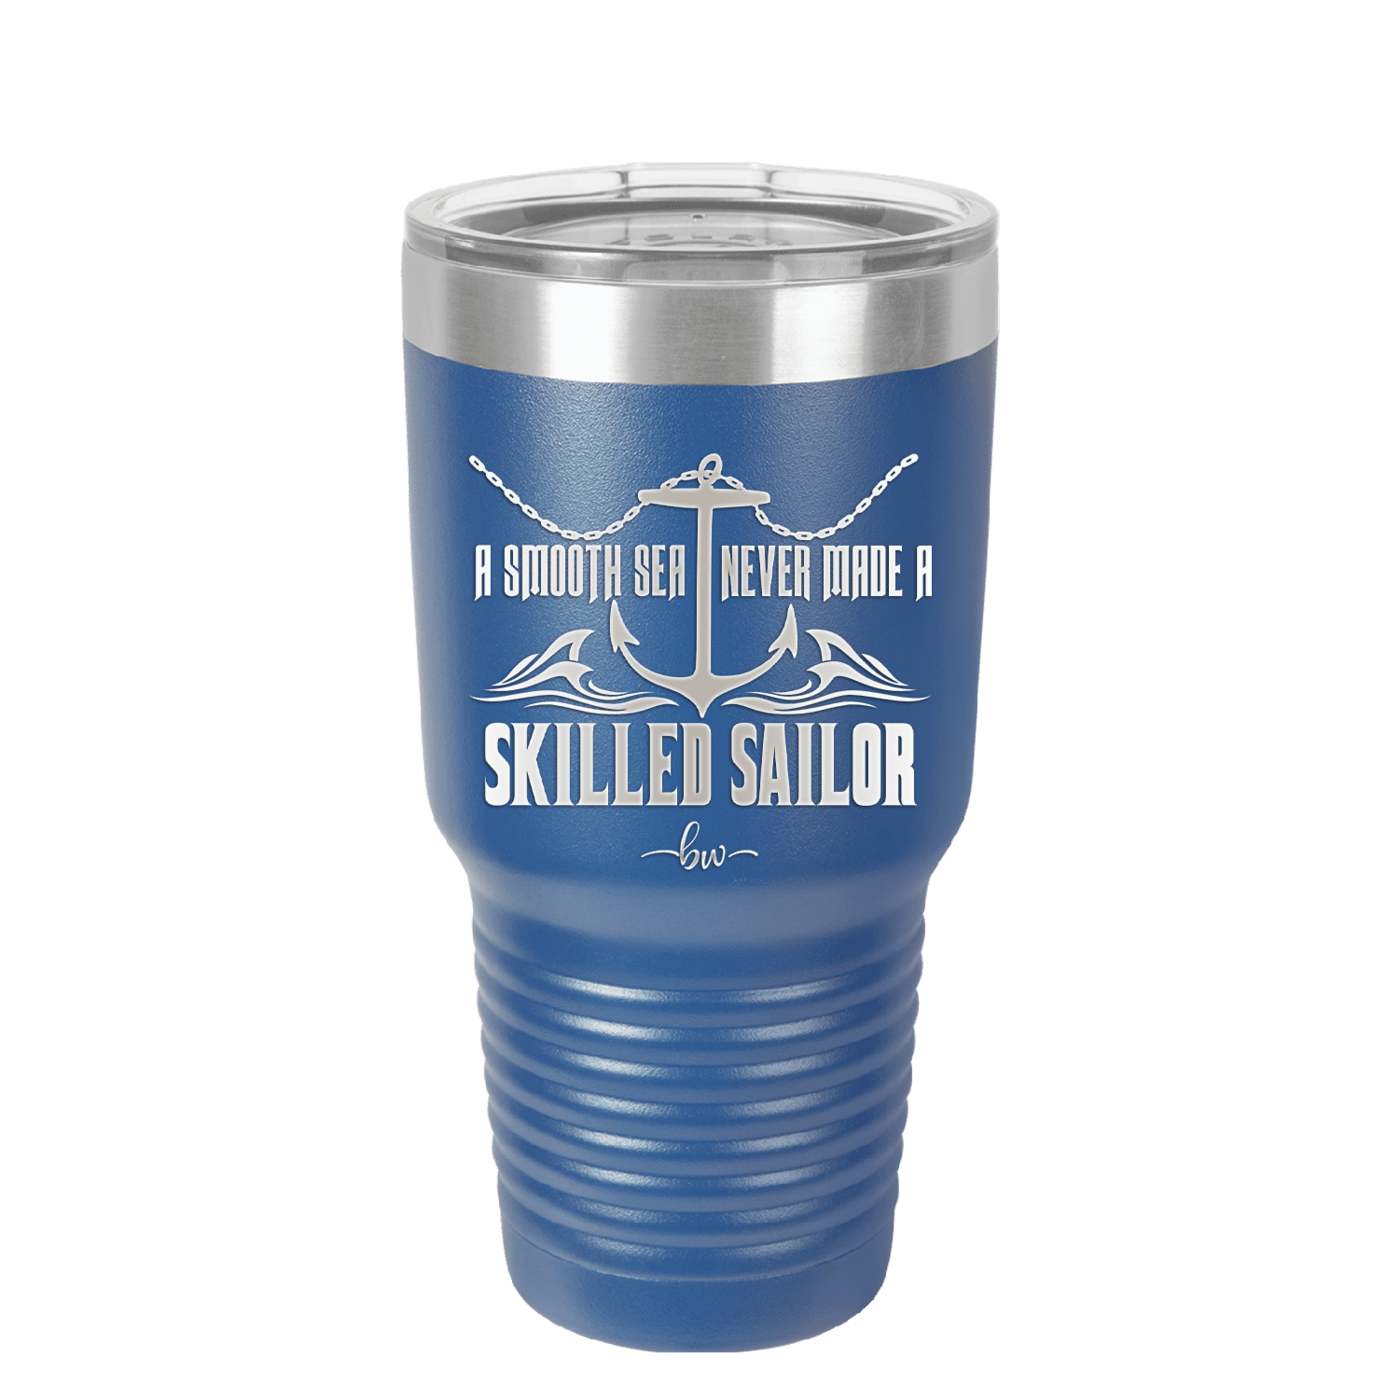 A Smooth Sea Never Made a Skilled Sailor 2 - Laser Engraved Stainless Steel Drinkware - 1427 -